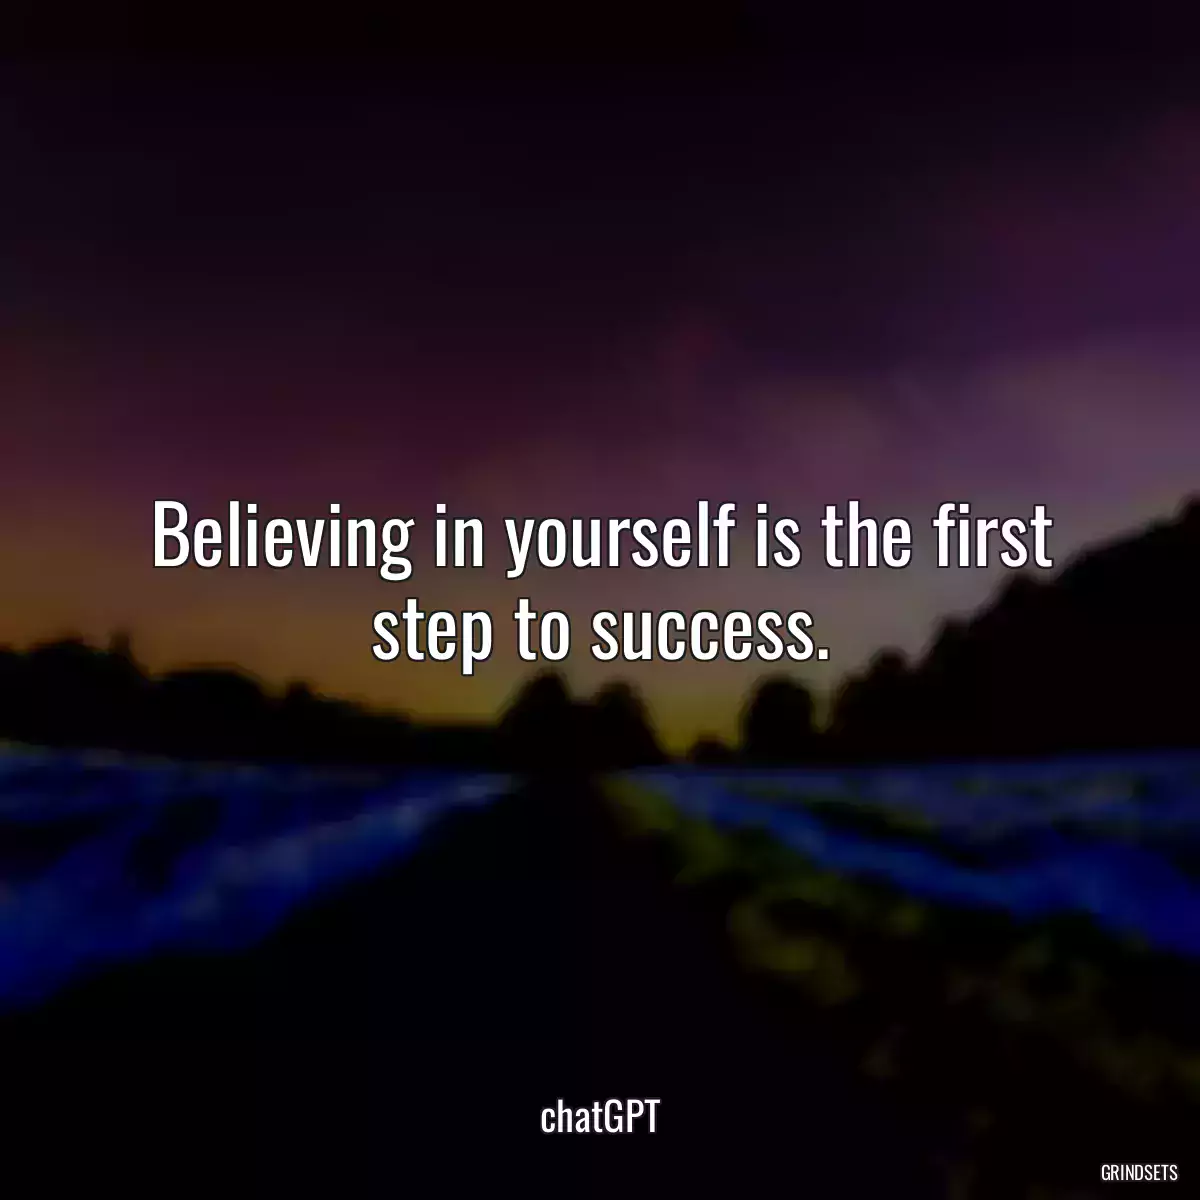 Believing in yourself is the first step to success.